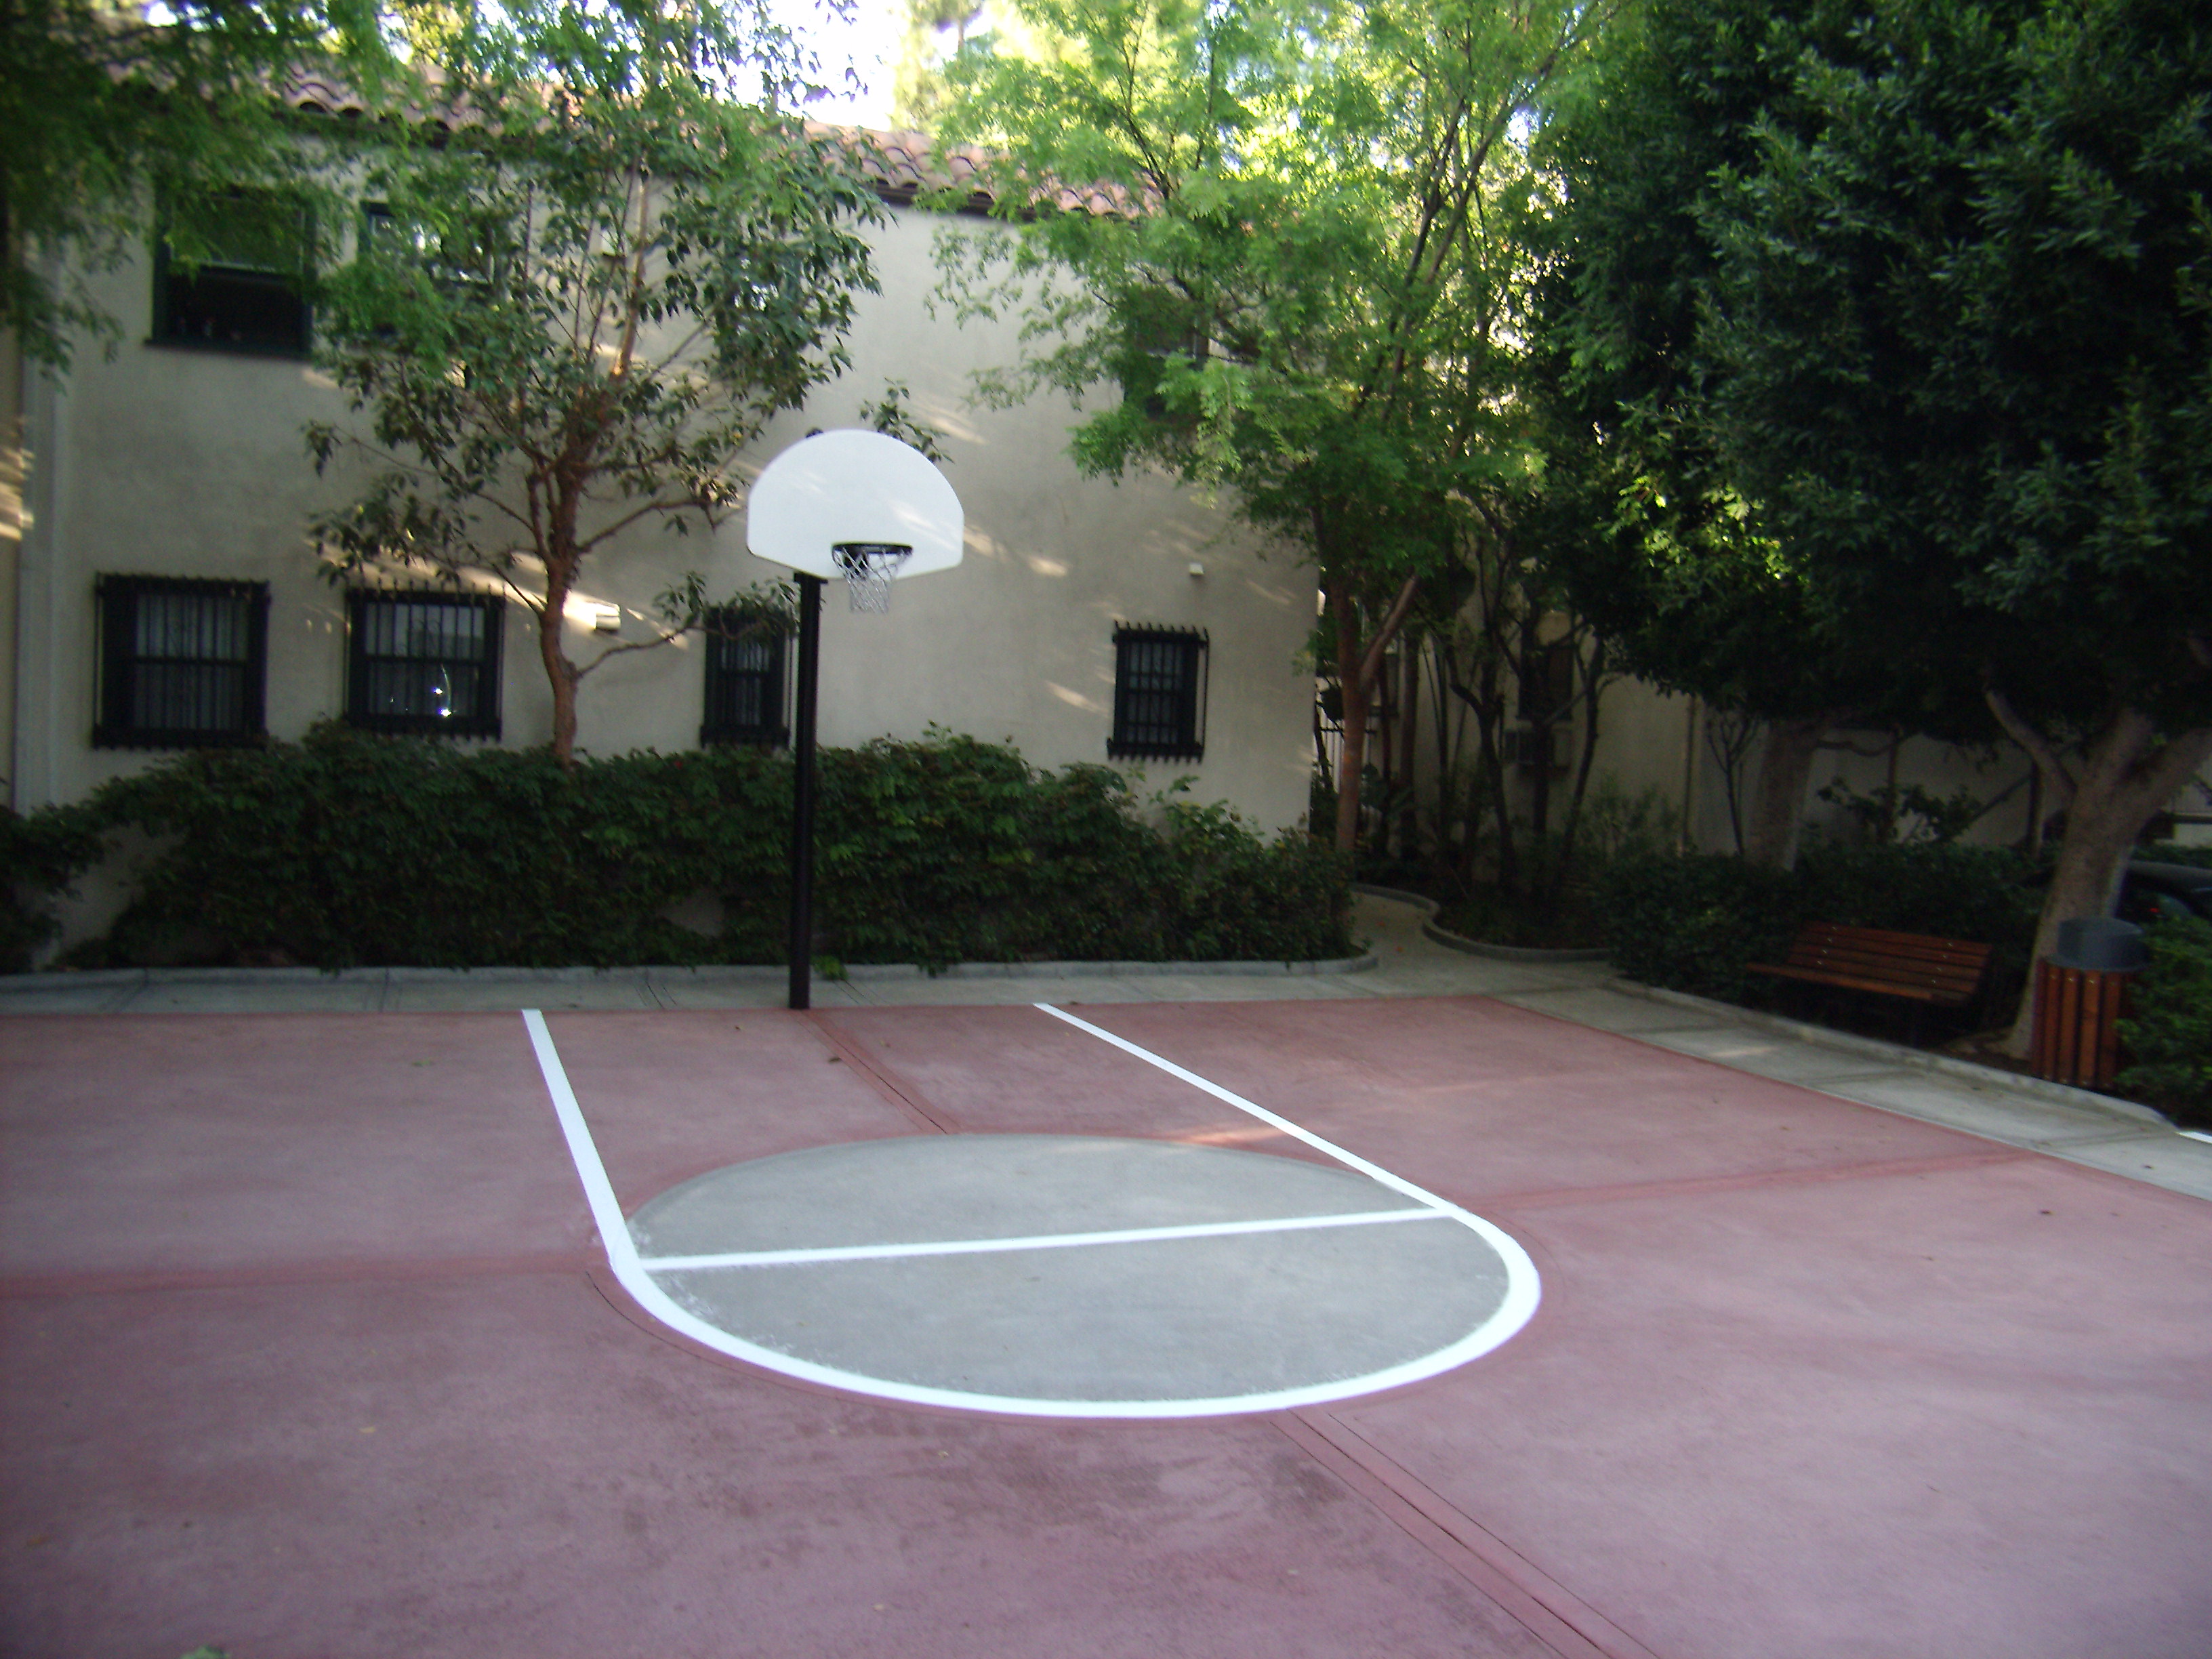 Exterior view of Hollywood El Centro Apartments basketball court. The building is behind the court with trees and bushes dividing the space between.